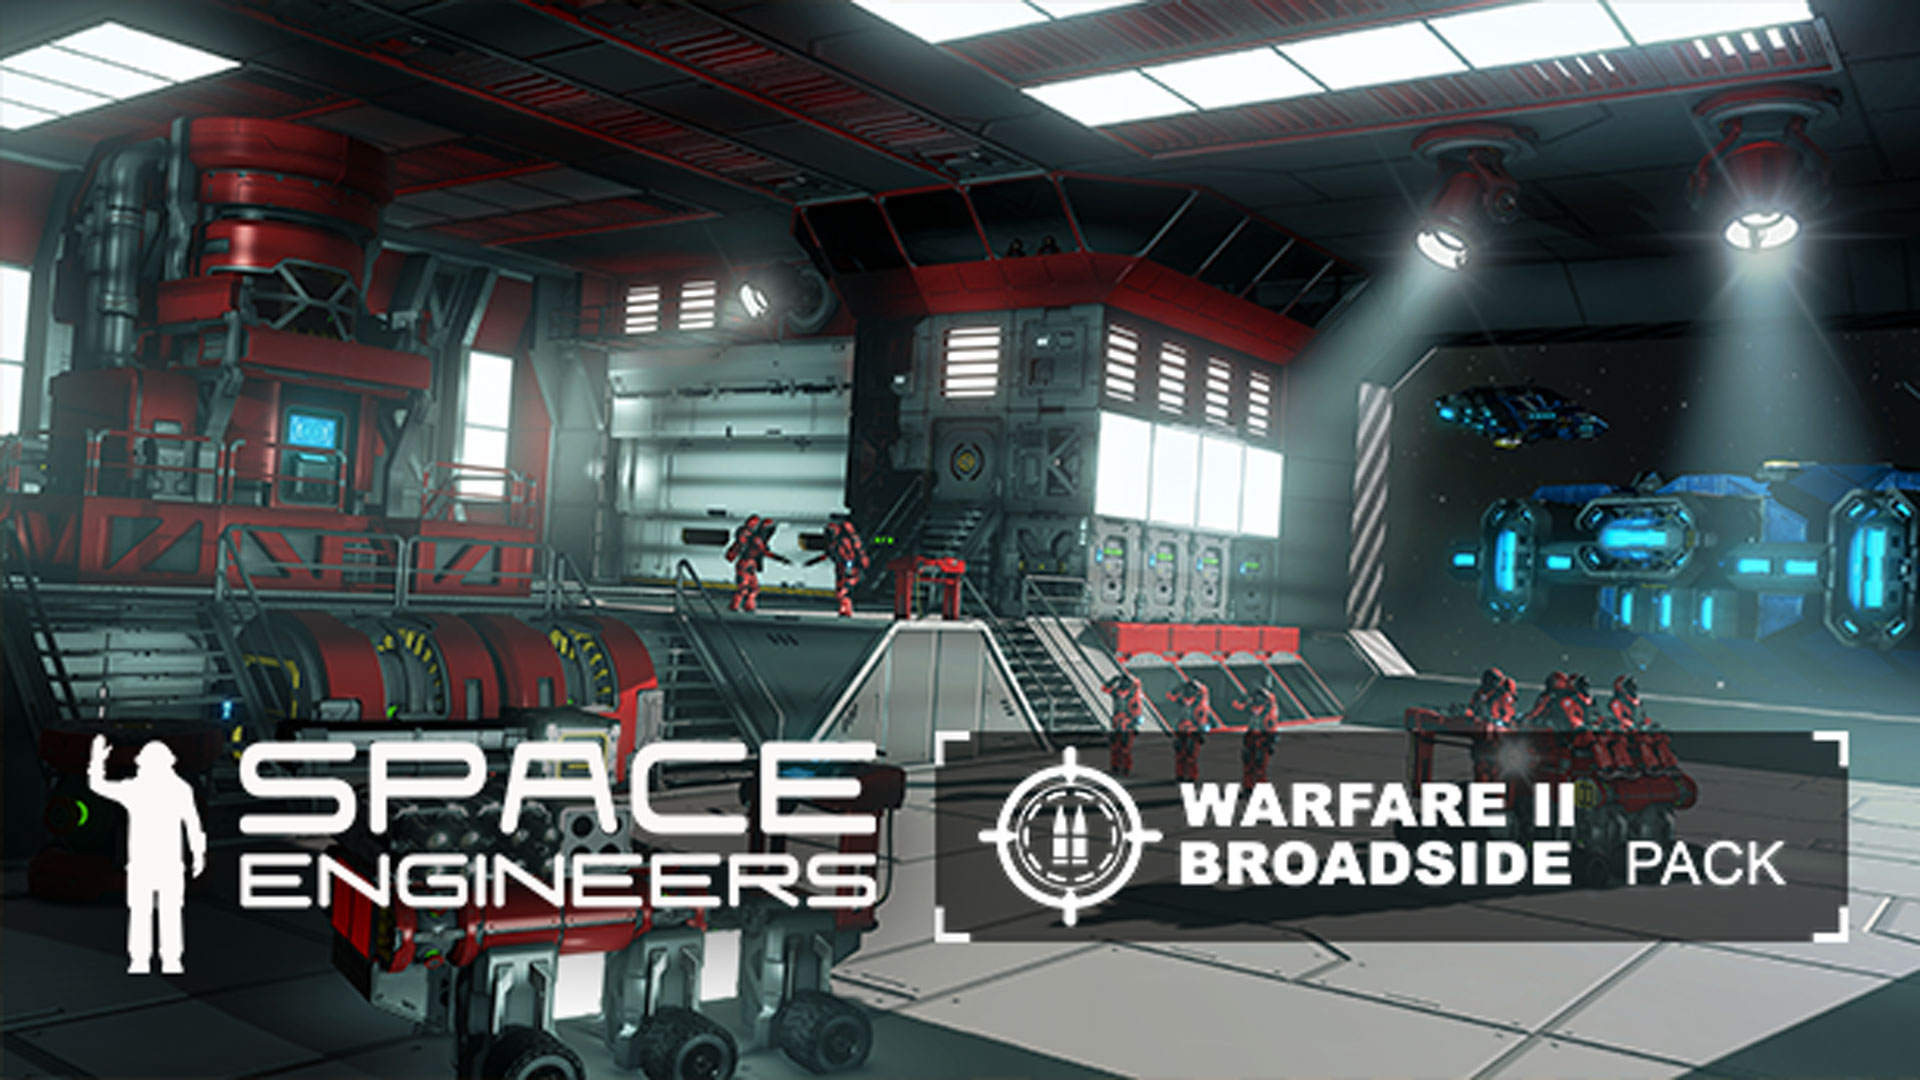 Video For Space Engineers Warfare 2: “Broadside” DLC is Available on Xbox One!